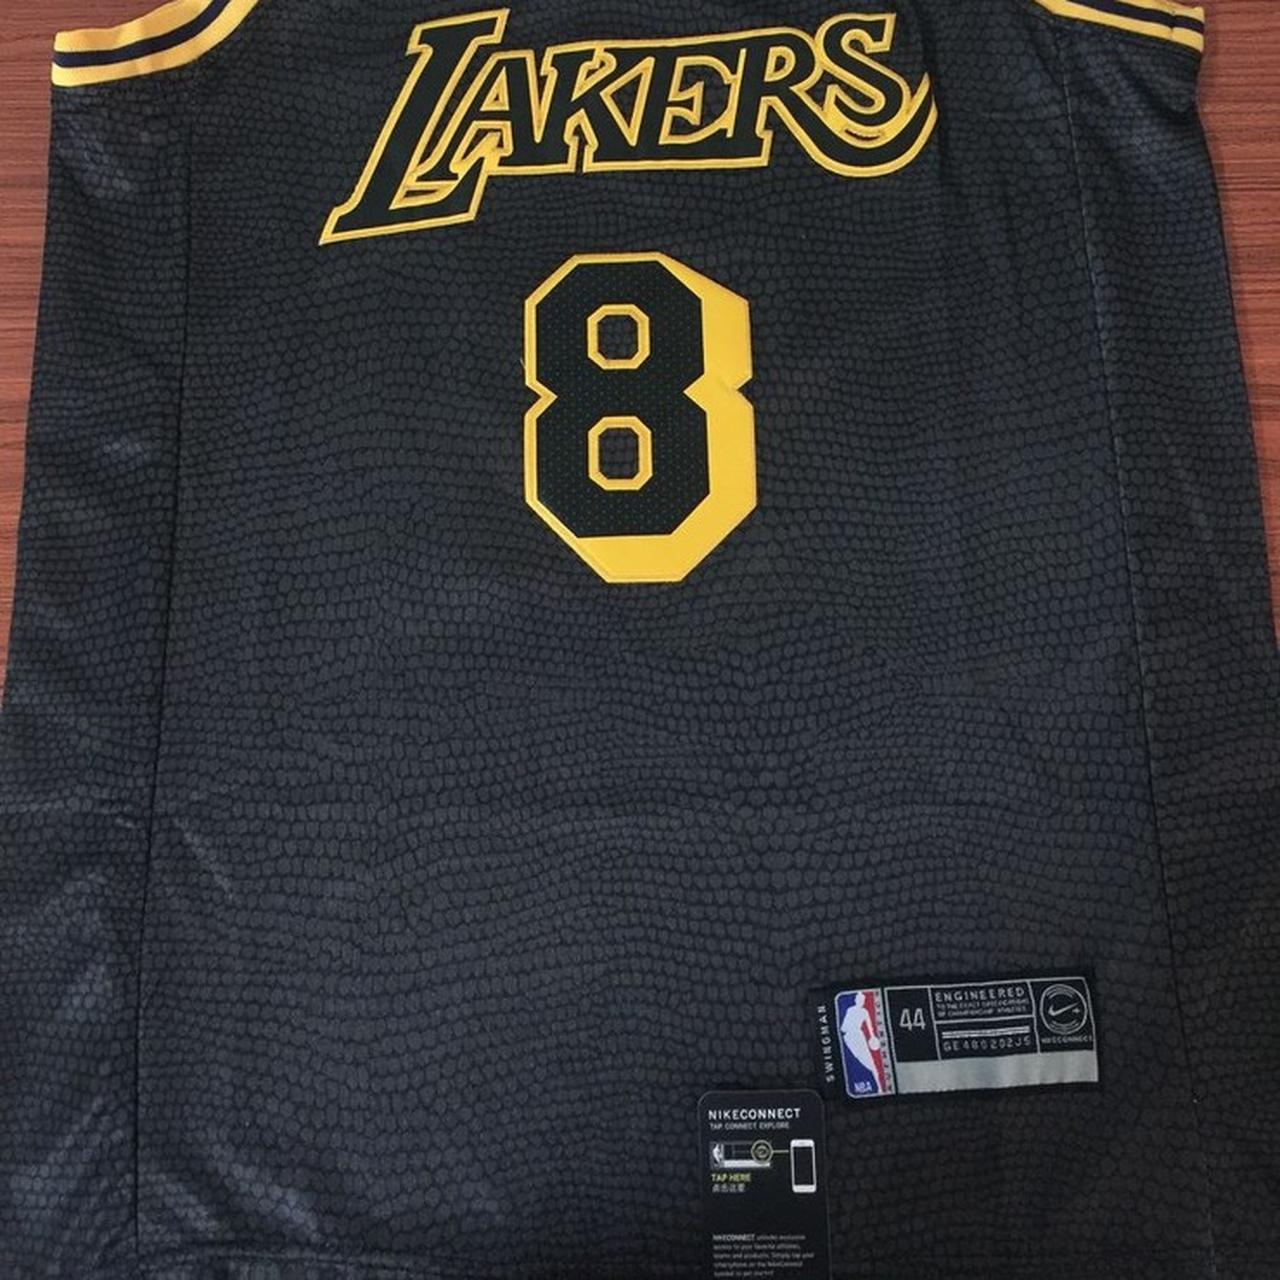 ❤️‍🔥 2008 Majestic Kobe Bryant Lakers jersey there's - Depop